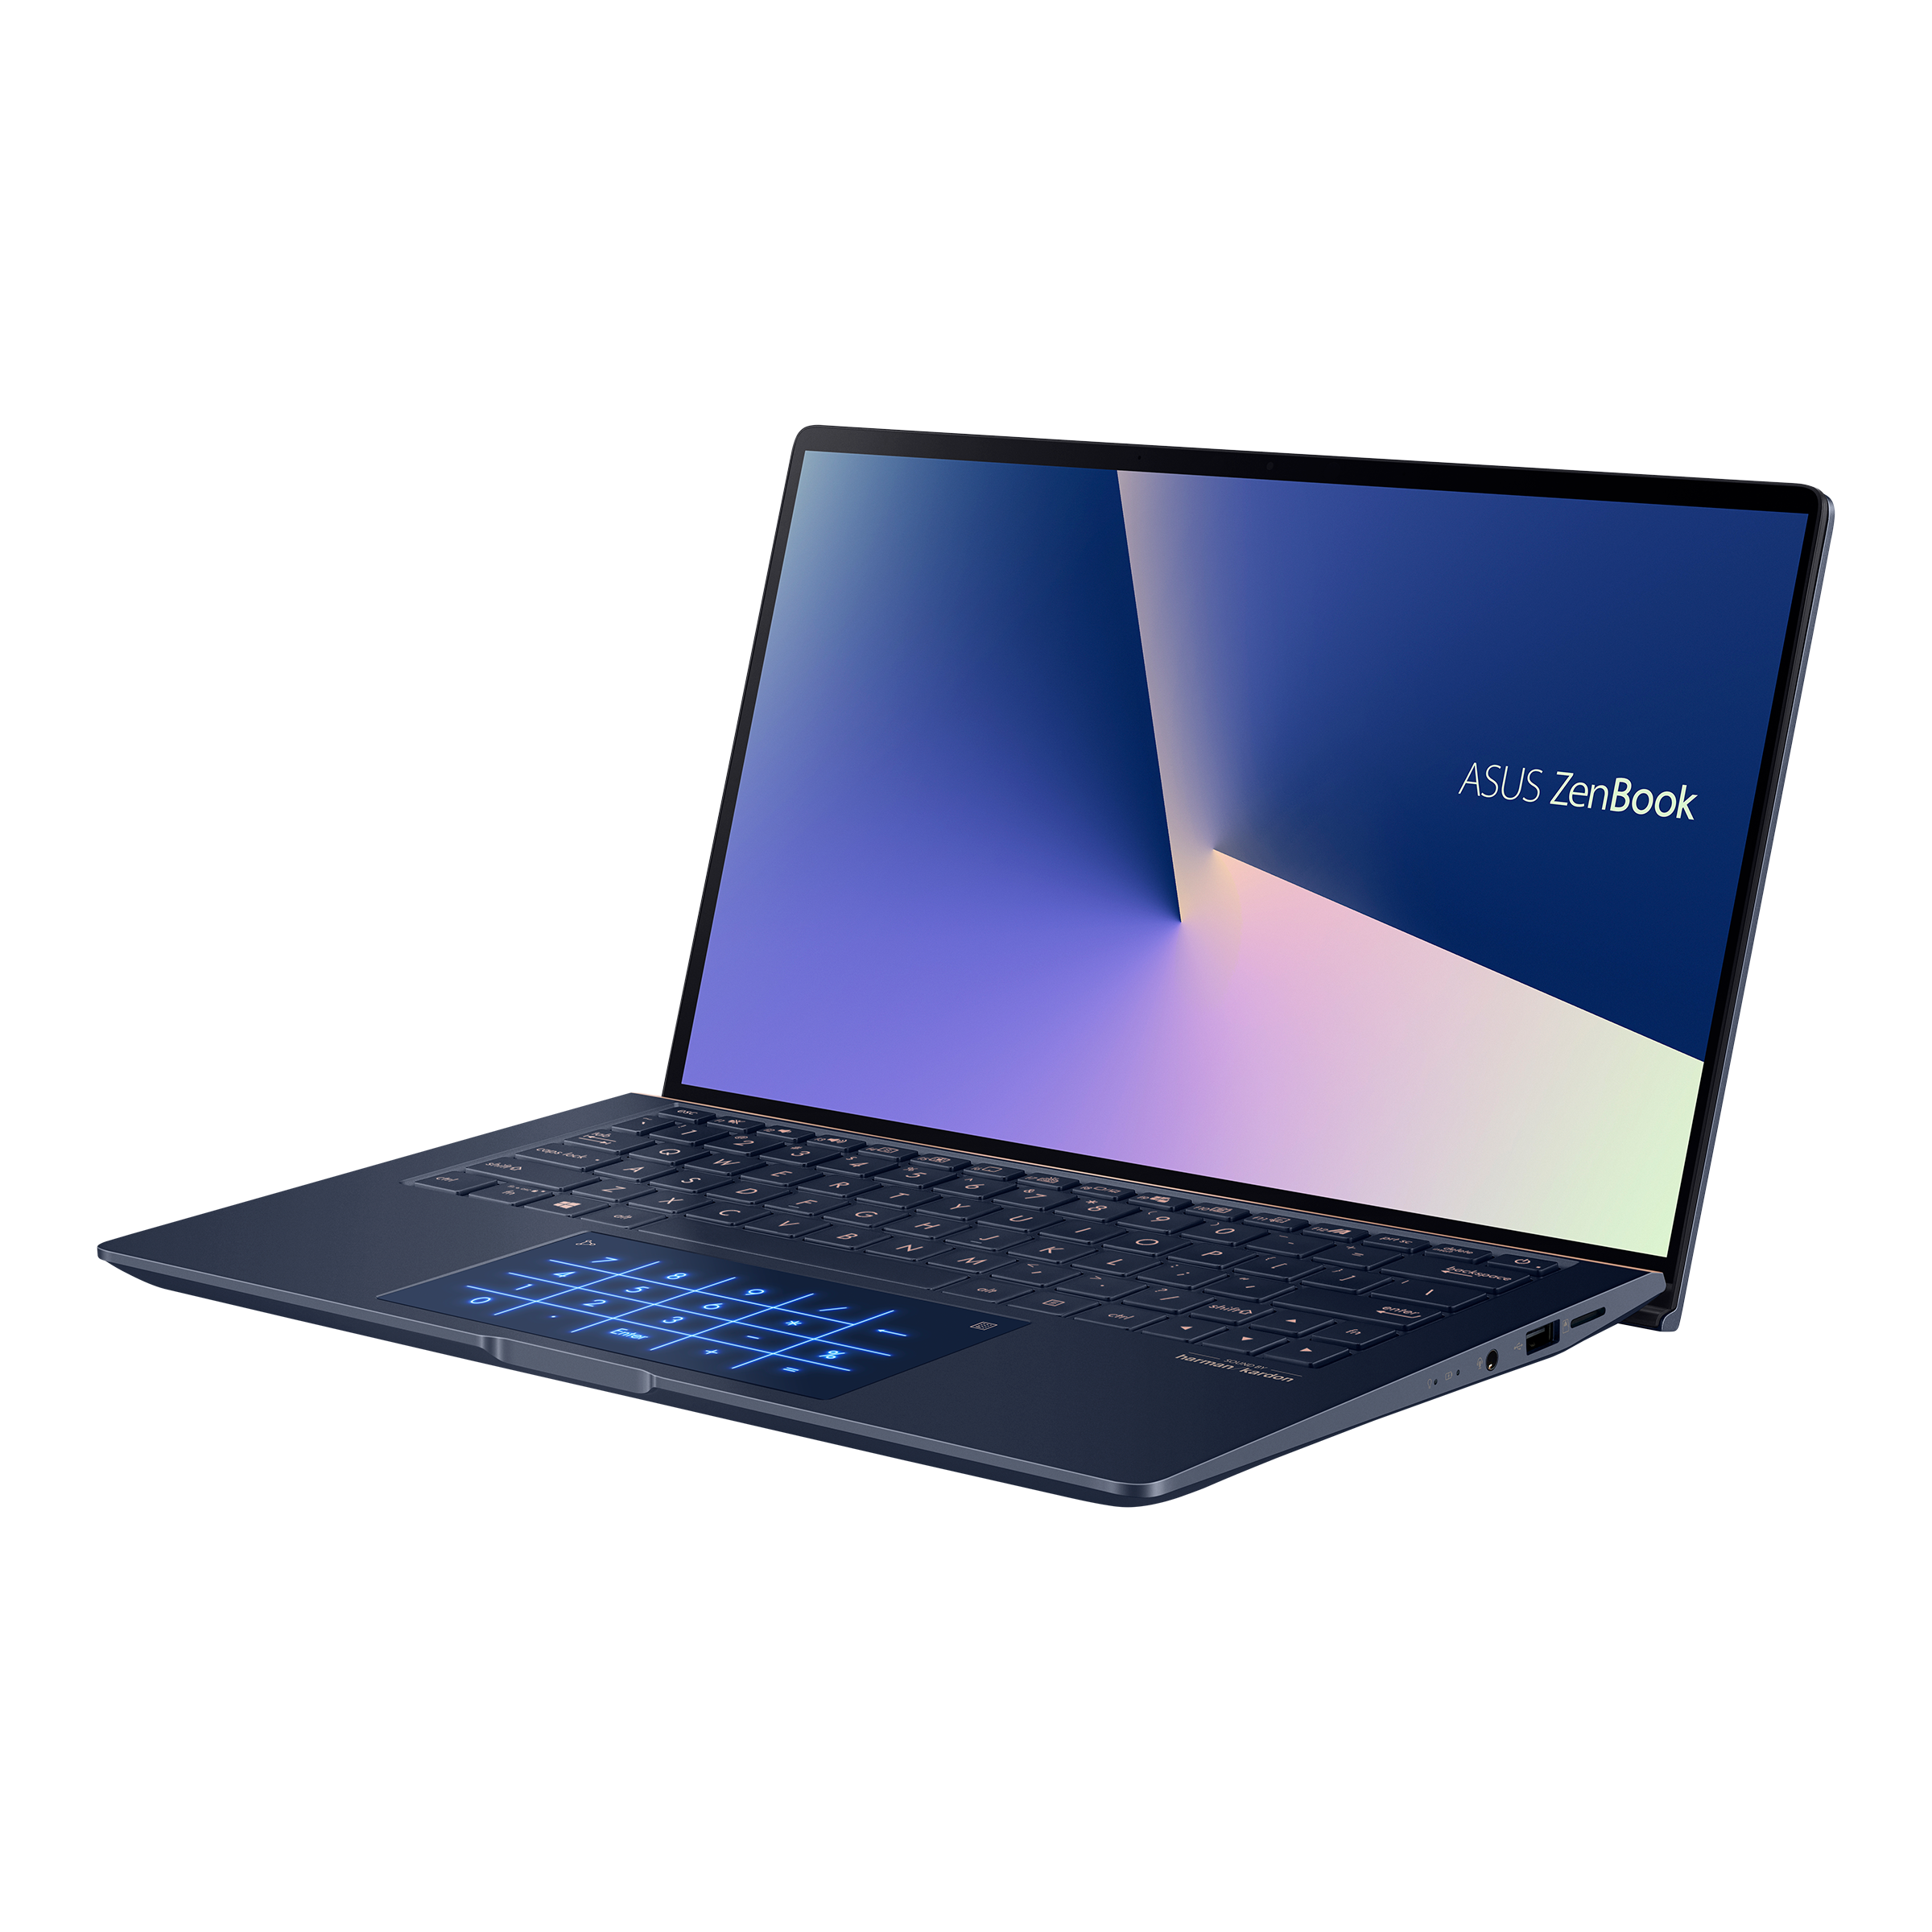 ASUS Zenbook S13 UX392｜Laptops For Home｜ASUS USA